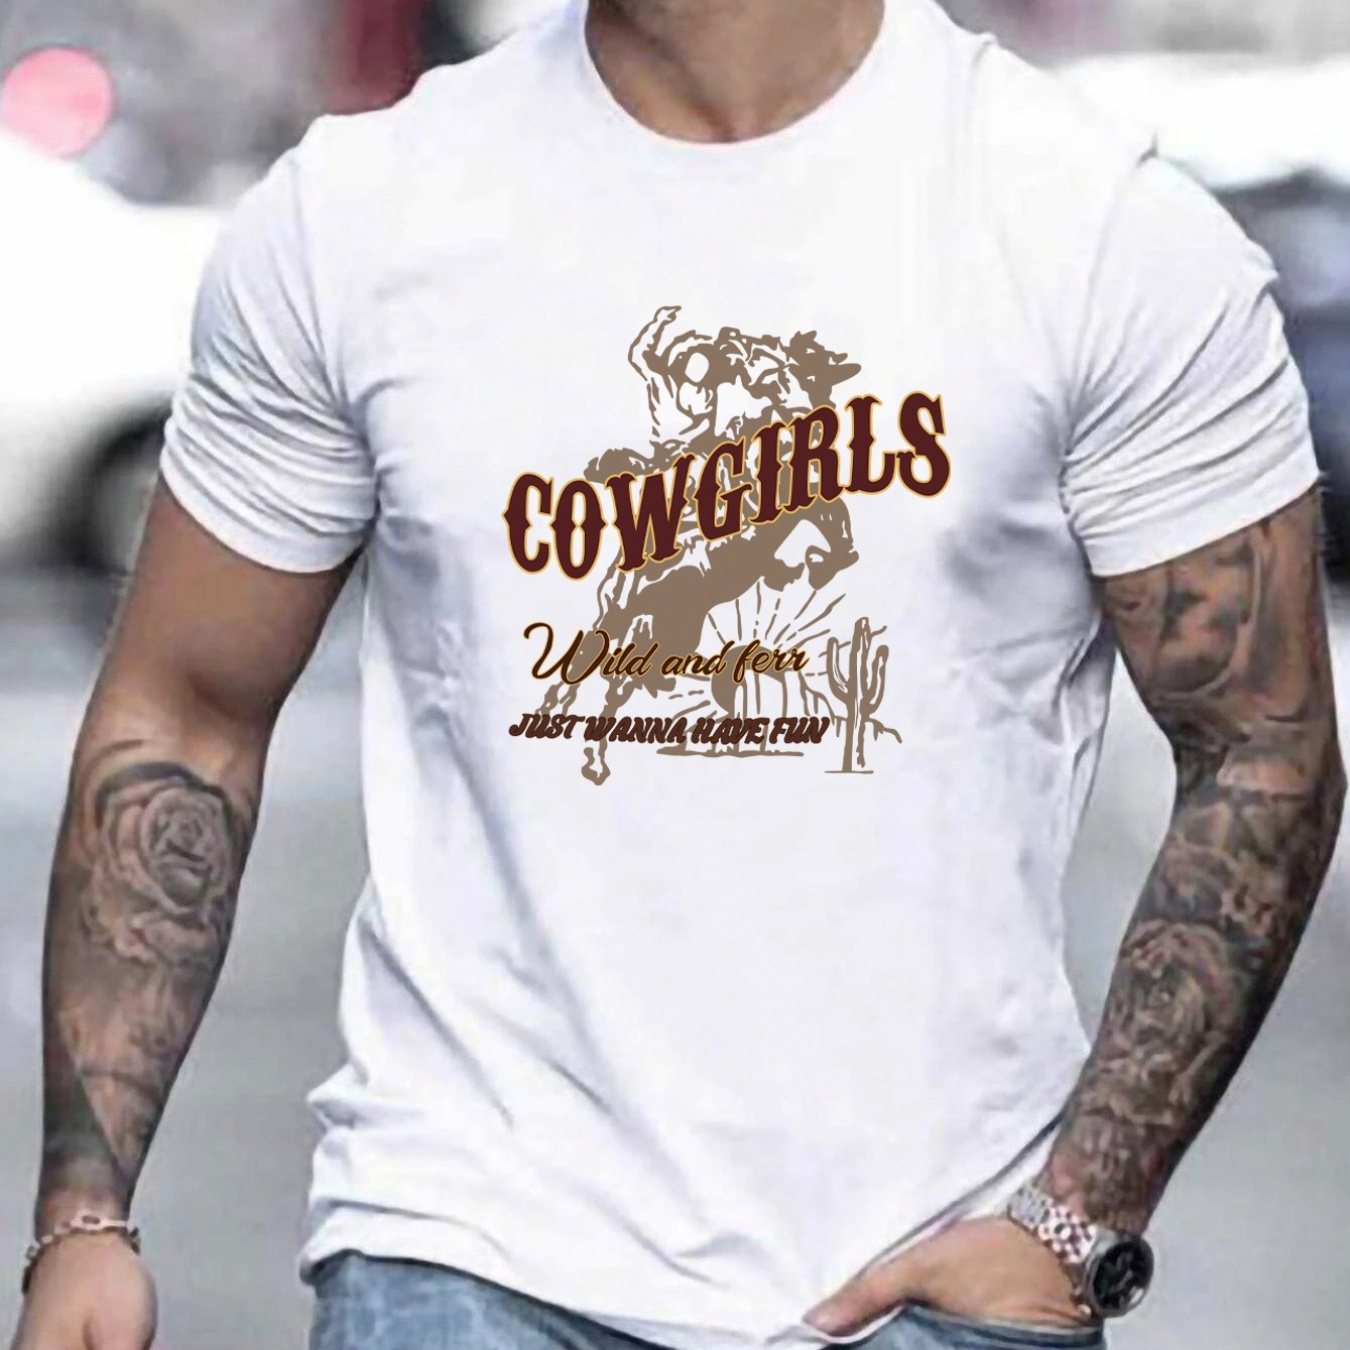 

cowgirls Wild And Free Just Wanna Have Fun" Letetr Pattern Print Men's Slightly Stretch T-shirt, Graphic Tee Men's Summer Clothes, Men's Outfits